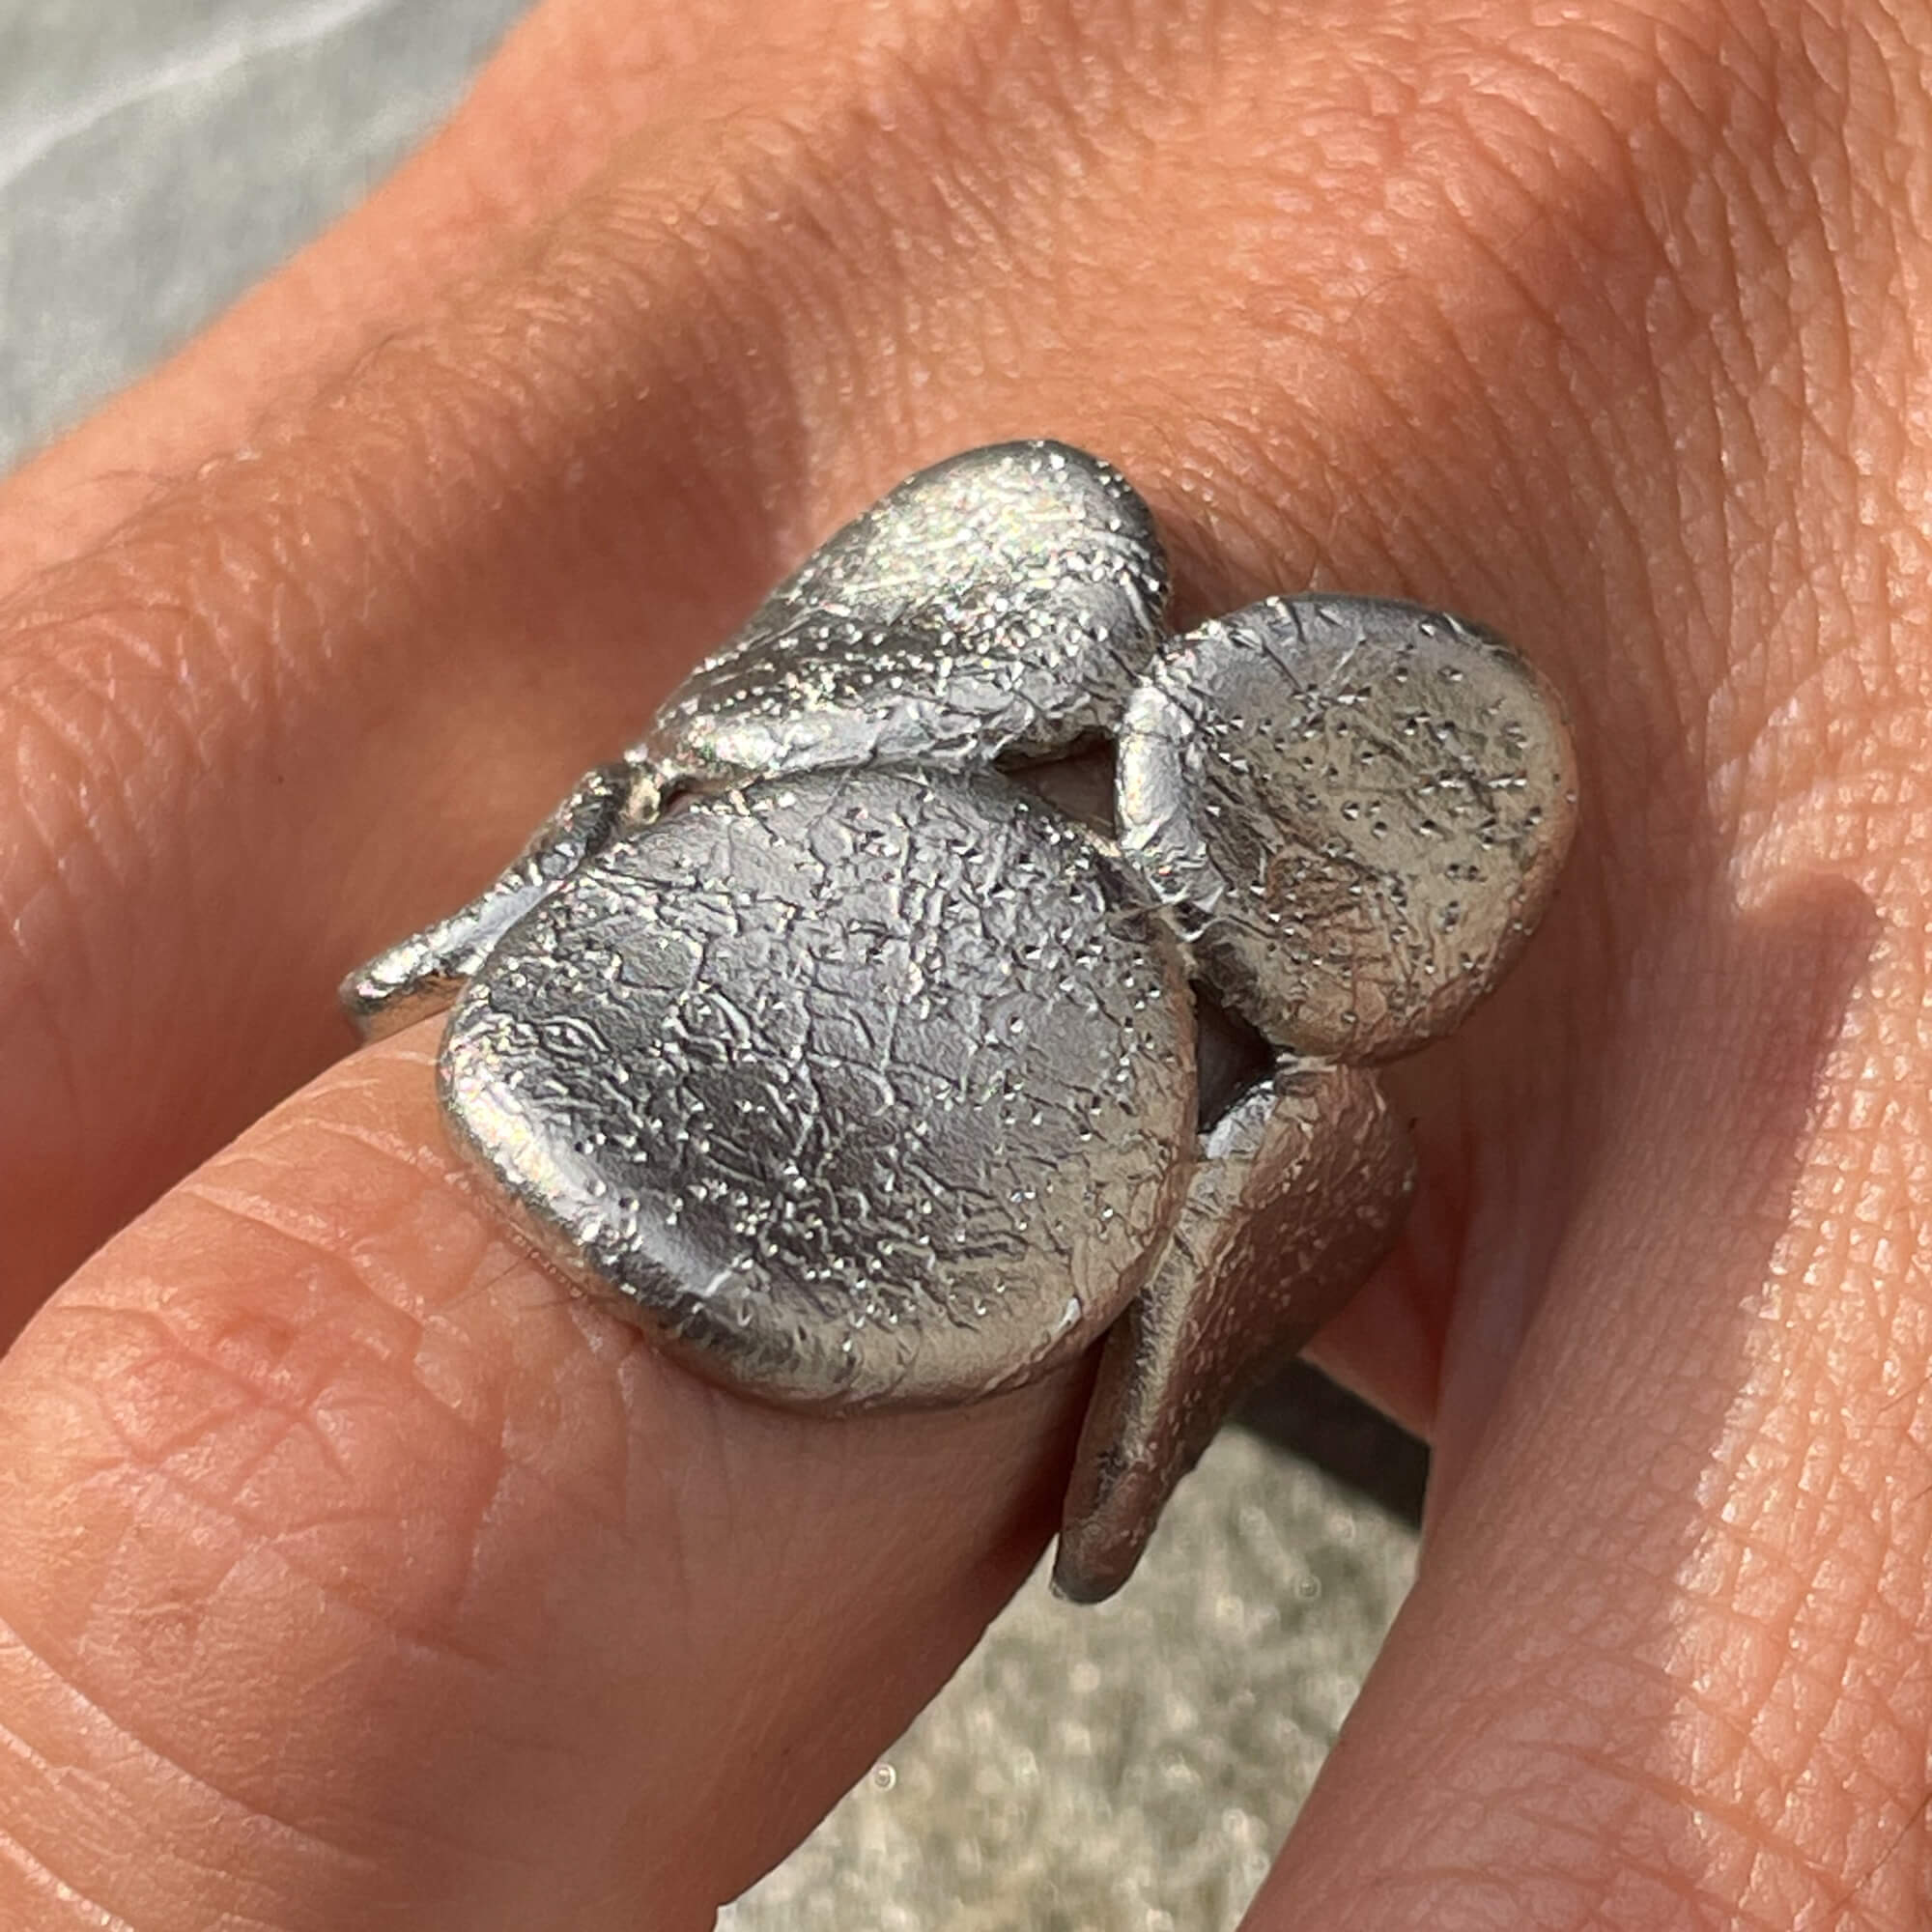 Silver ring with oval-shaped finishes